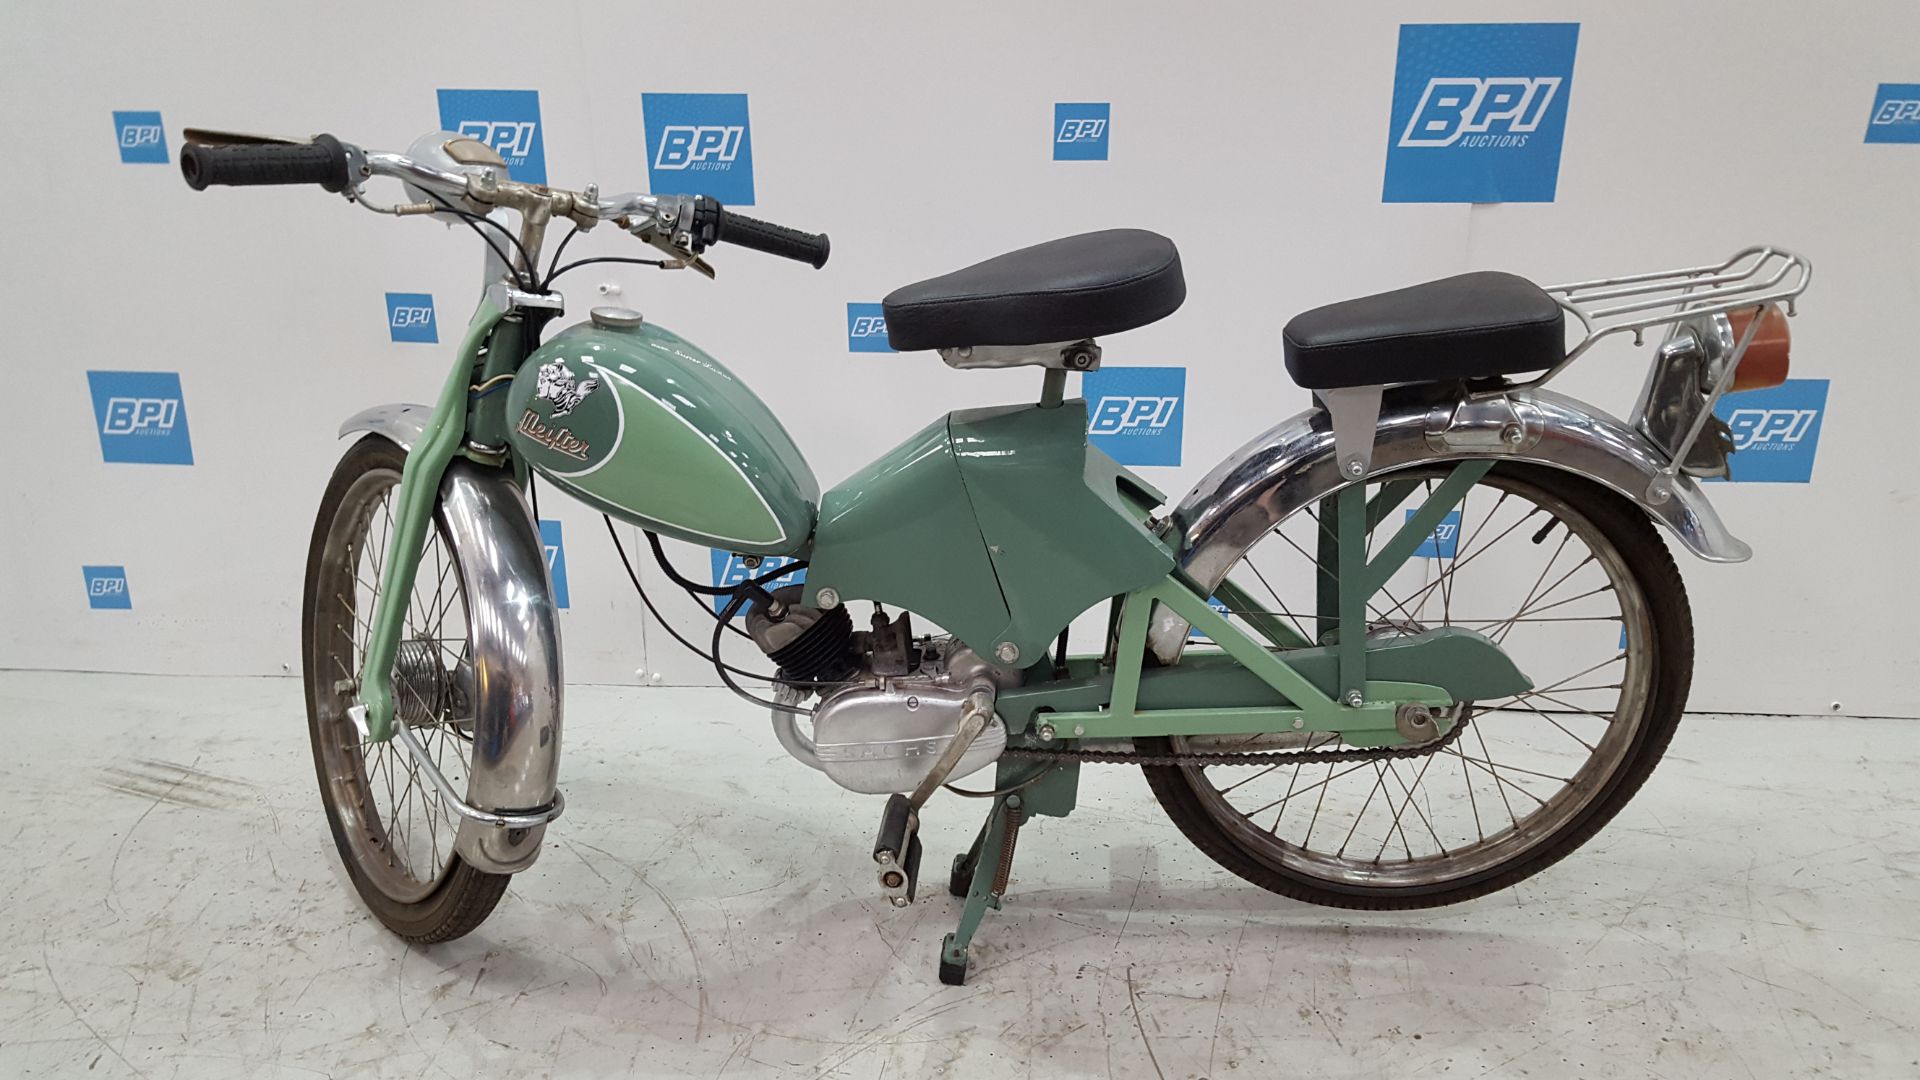 1955 Meister Moped 50cc - Image 6 of 10